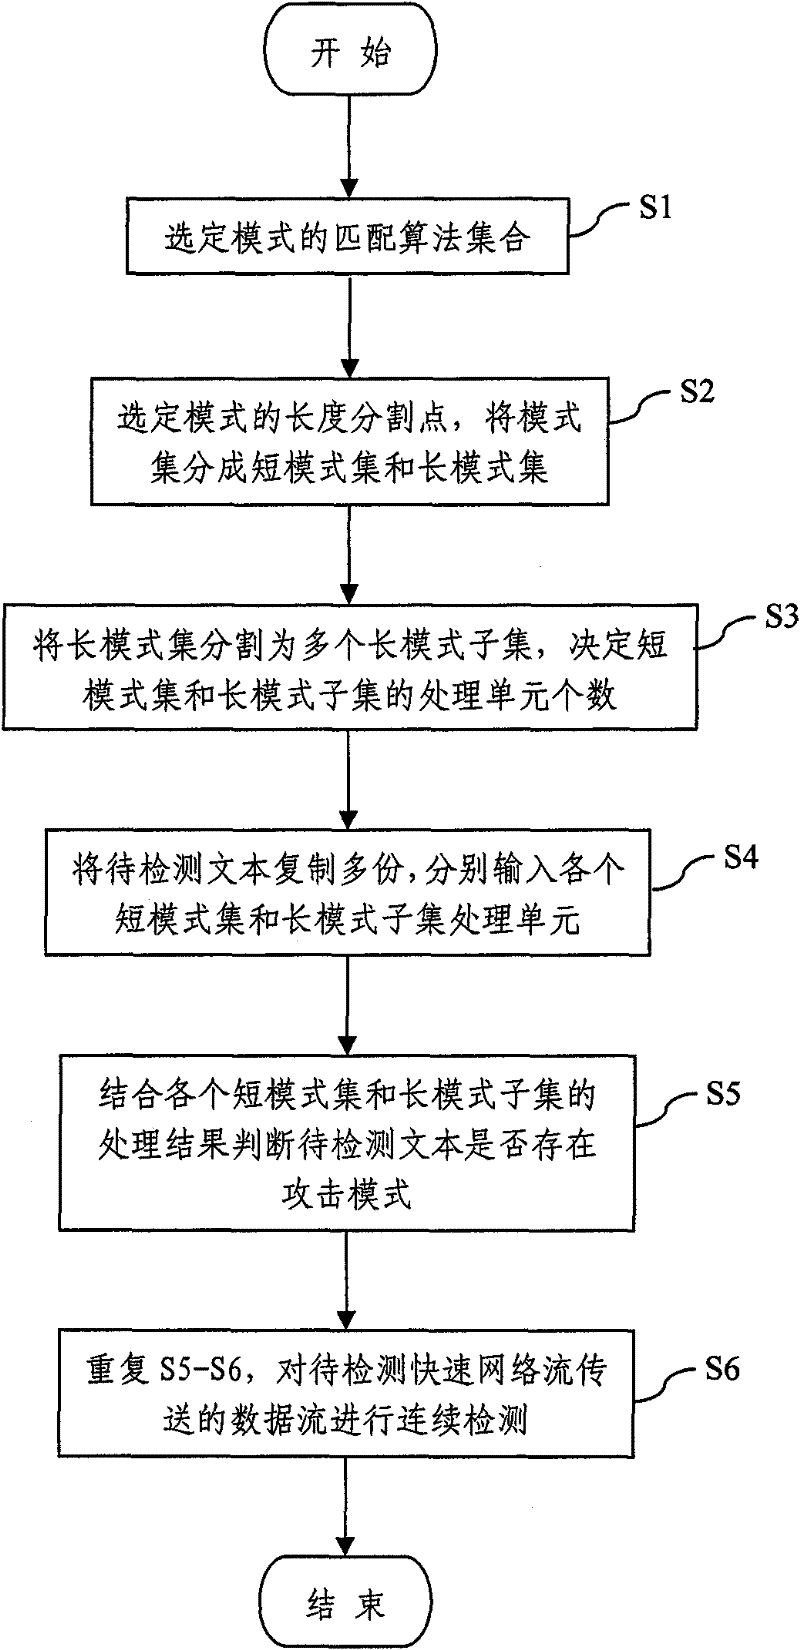 A parallel network flow feature detection method and system based on pattern clustering